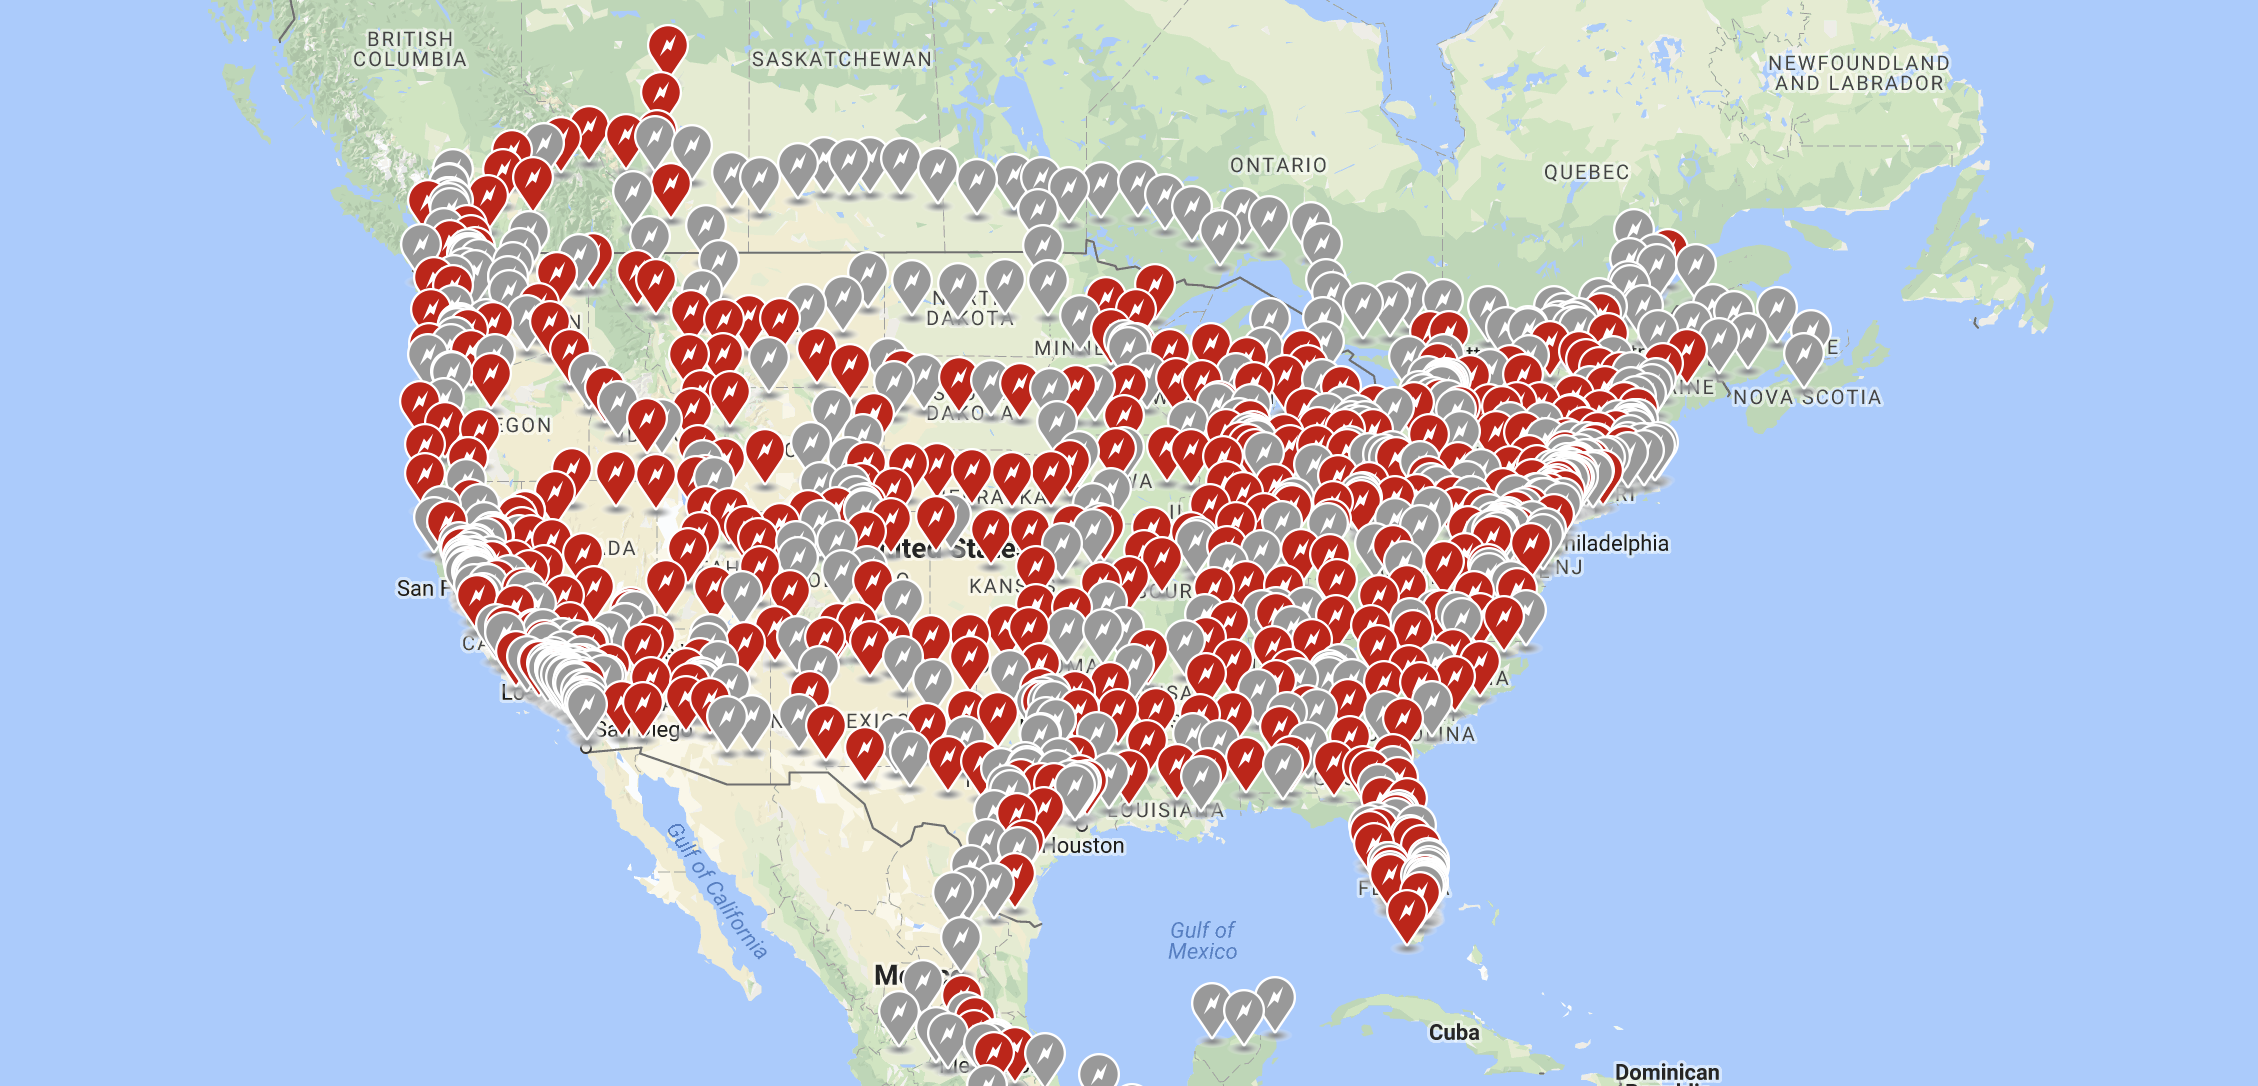 Tesla Charging Stations Map Wisconsin - News Current Station In The Word